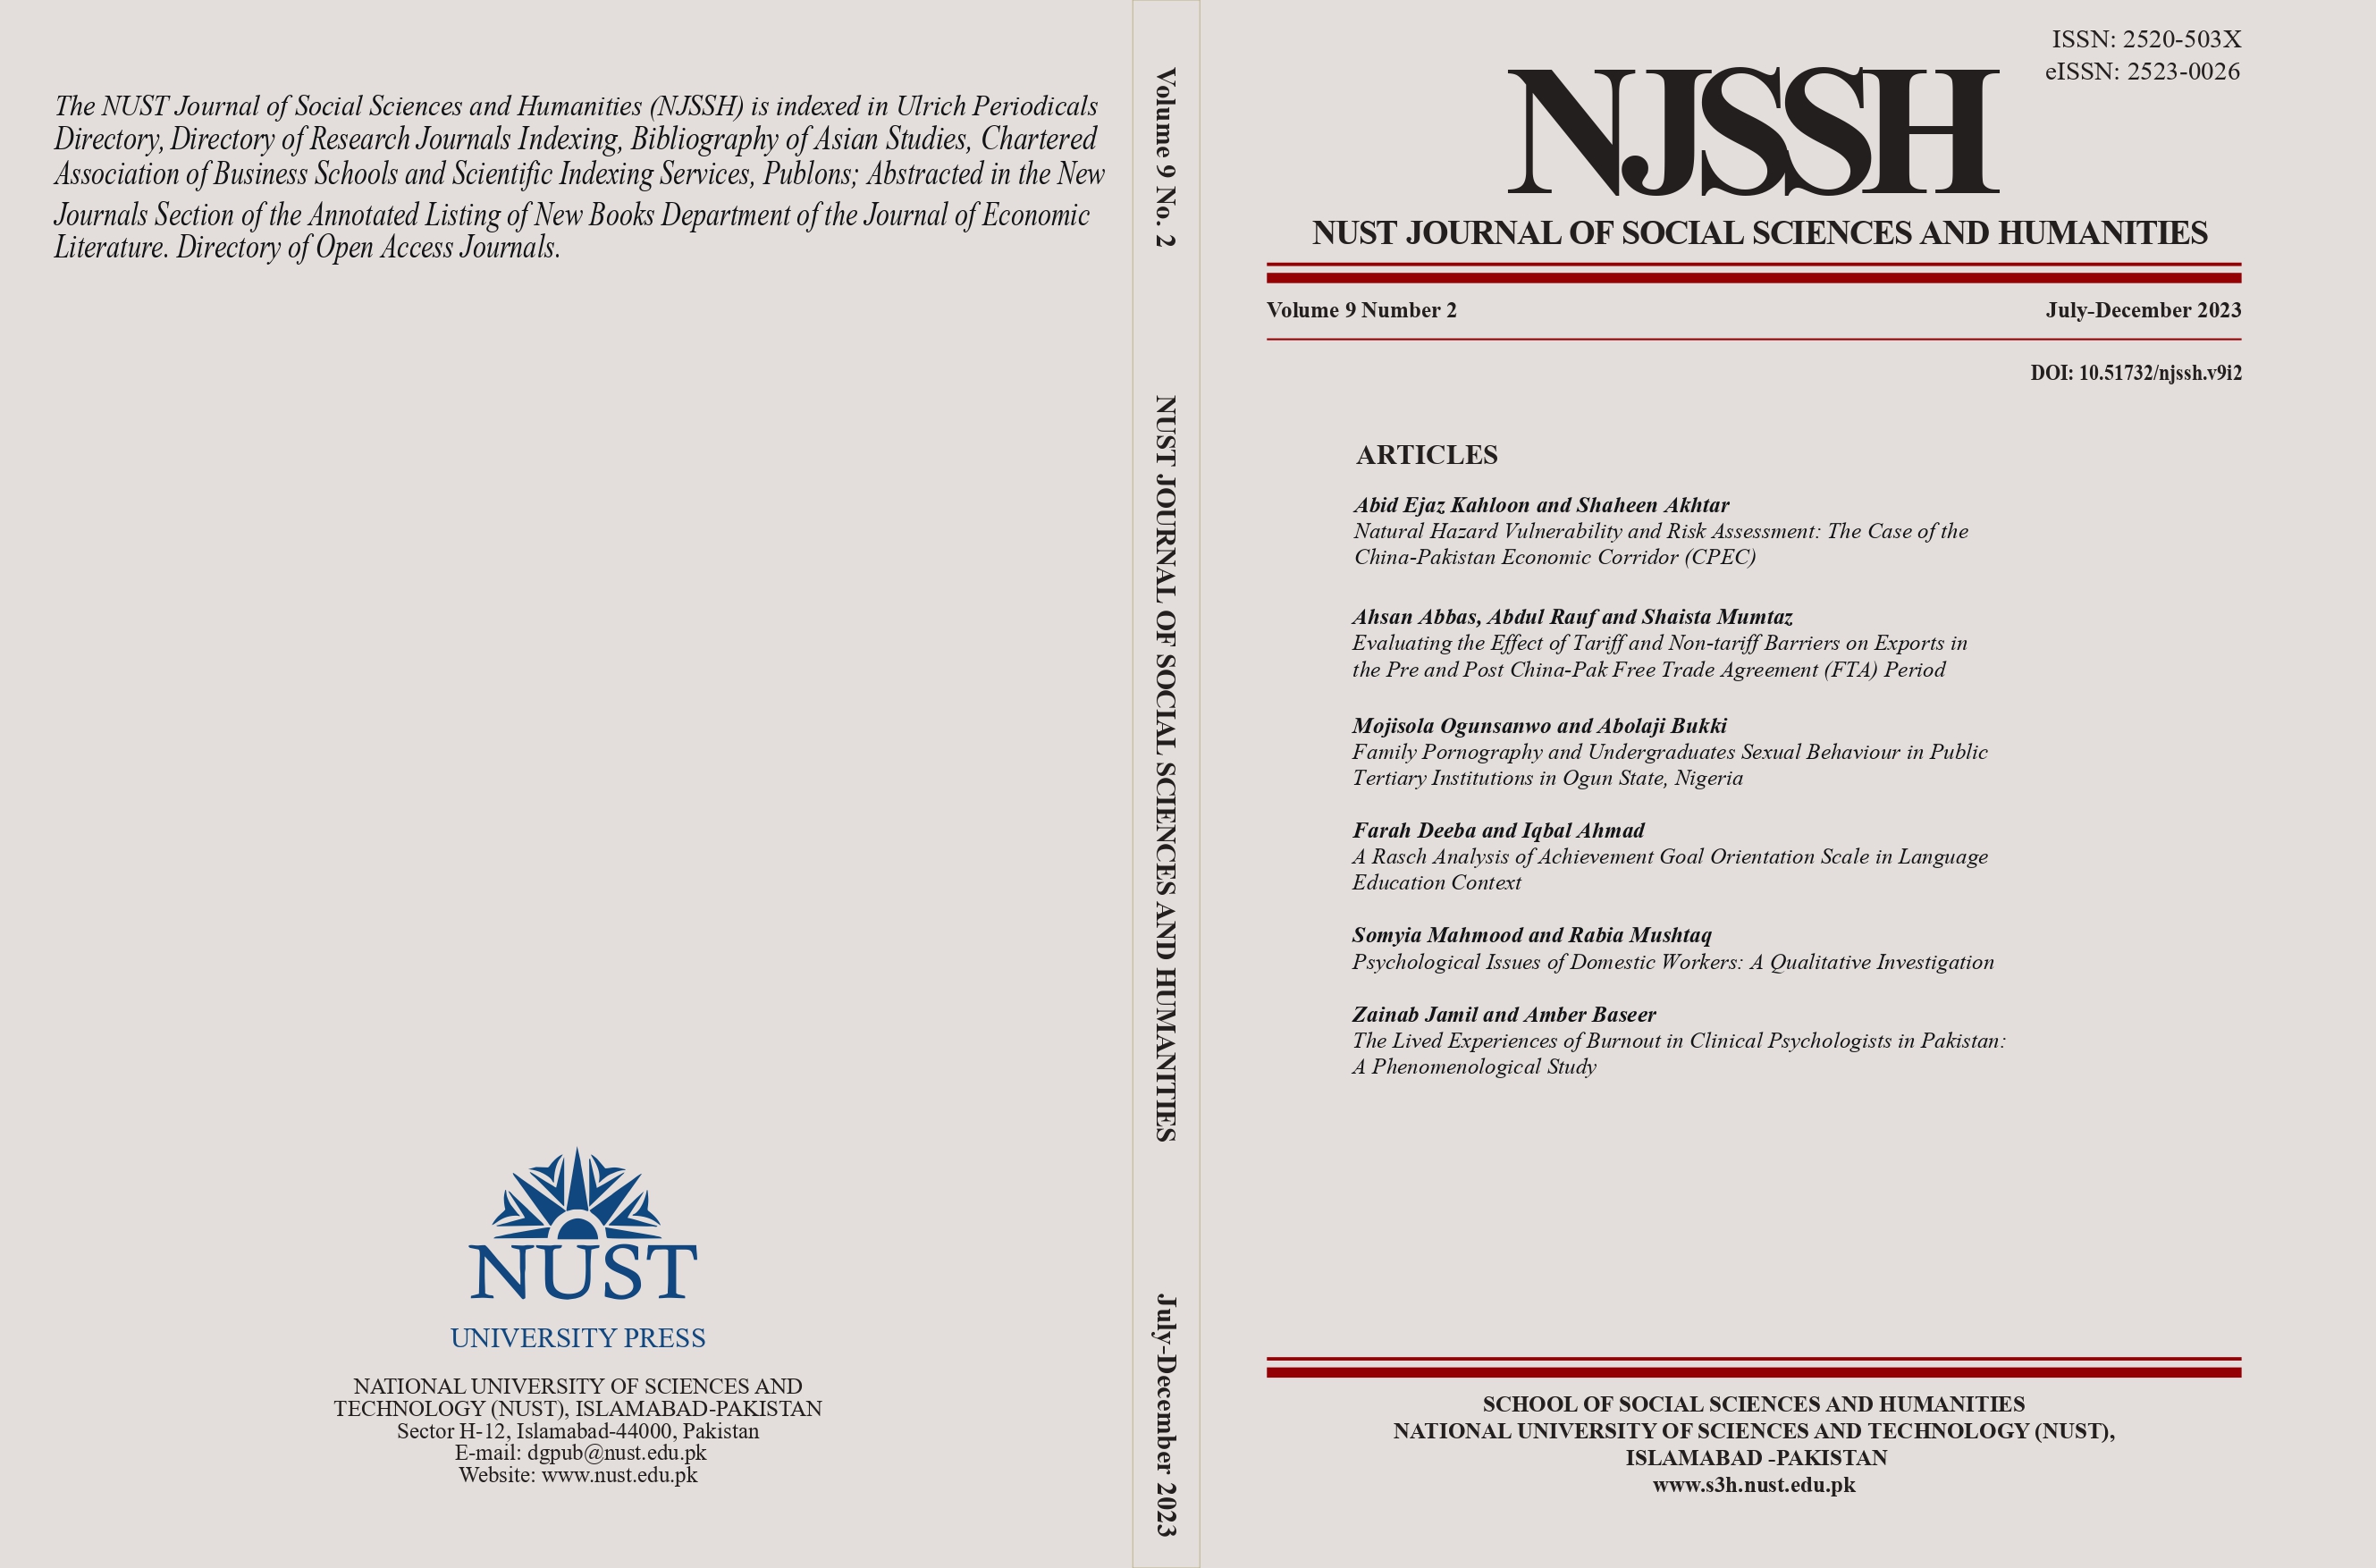 					View Vol. 9 No. 2 (2023): NUST Journal of Social Sciences and Humanities 
				